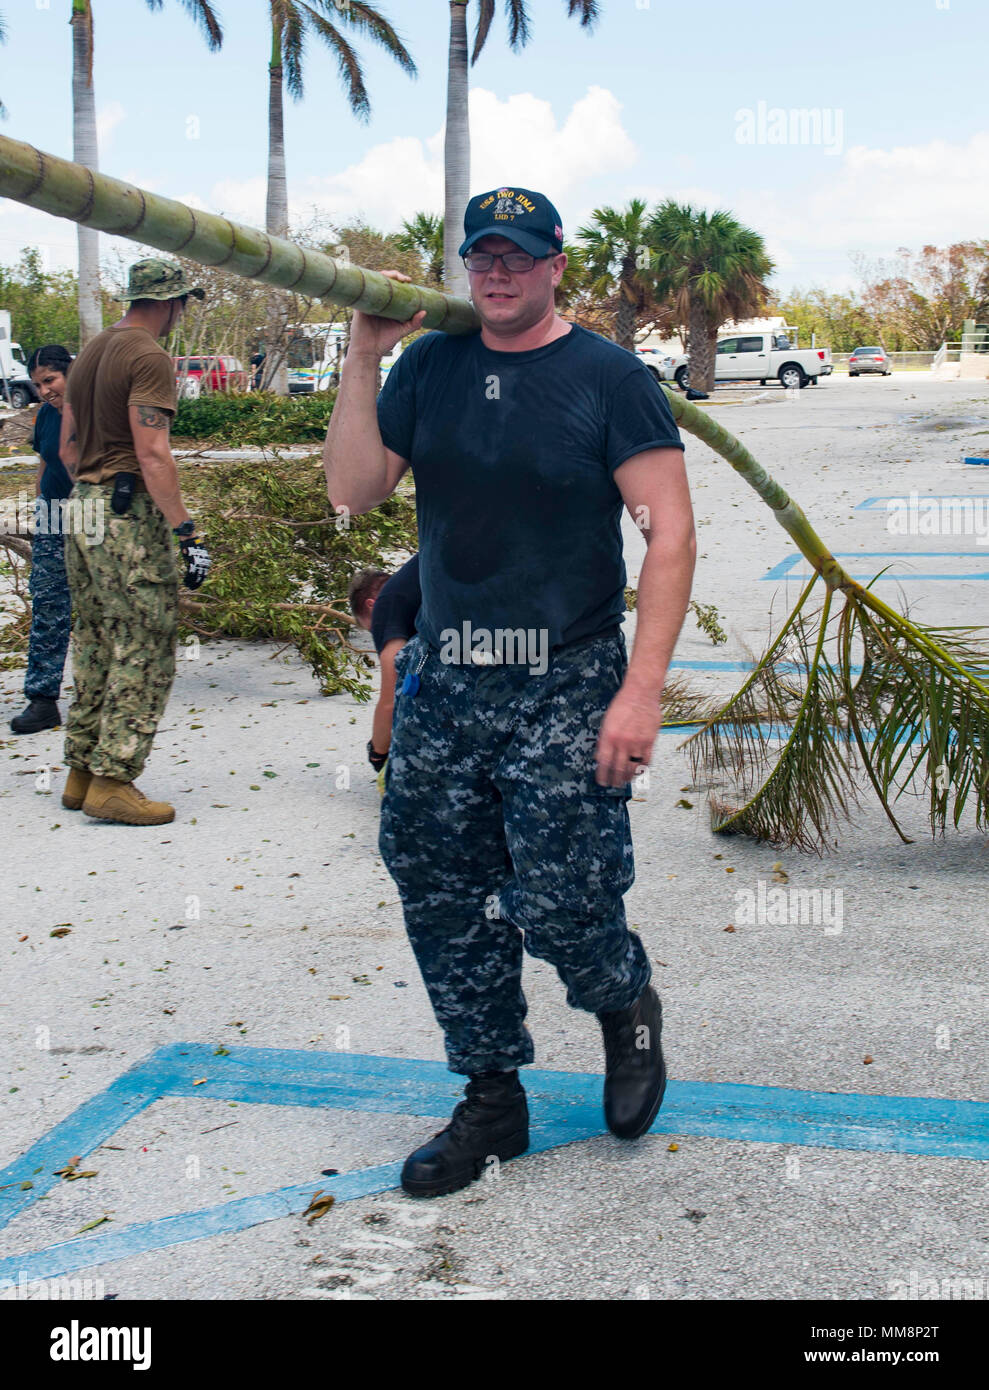 KEY WEST, Fla. (Sept. 14, 2017) Air Traffic Controller 3rd Class Thomas Goss, from New Hampshire, clears debris from Lower Keys Medical Center, Key West, Florida, during humanitarian relief efforts following Hurricane Irma’s landfall in Key West. The Department of Defense is supporting Federal Emergency Management Agency, the lead federal agency, in helping those affected by Hurricane Irma to minimize suffering and as one component of the overall whole-of-government response efforts.  (U.S. Navy photo by Mass Communication Specialist 3rd Class Kevin Leitner/Released) Stock Photo